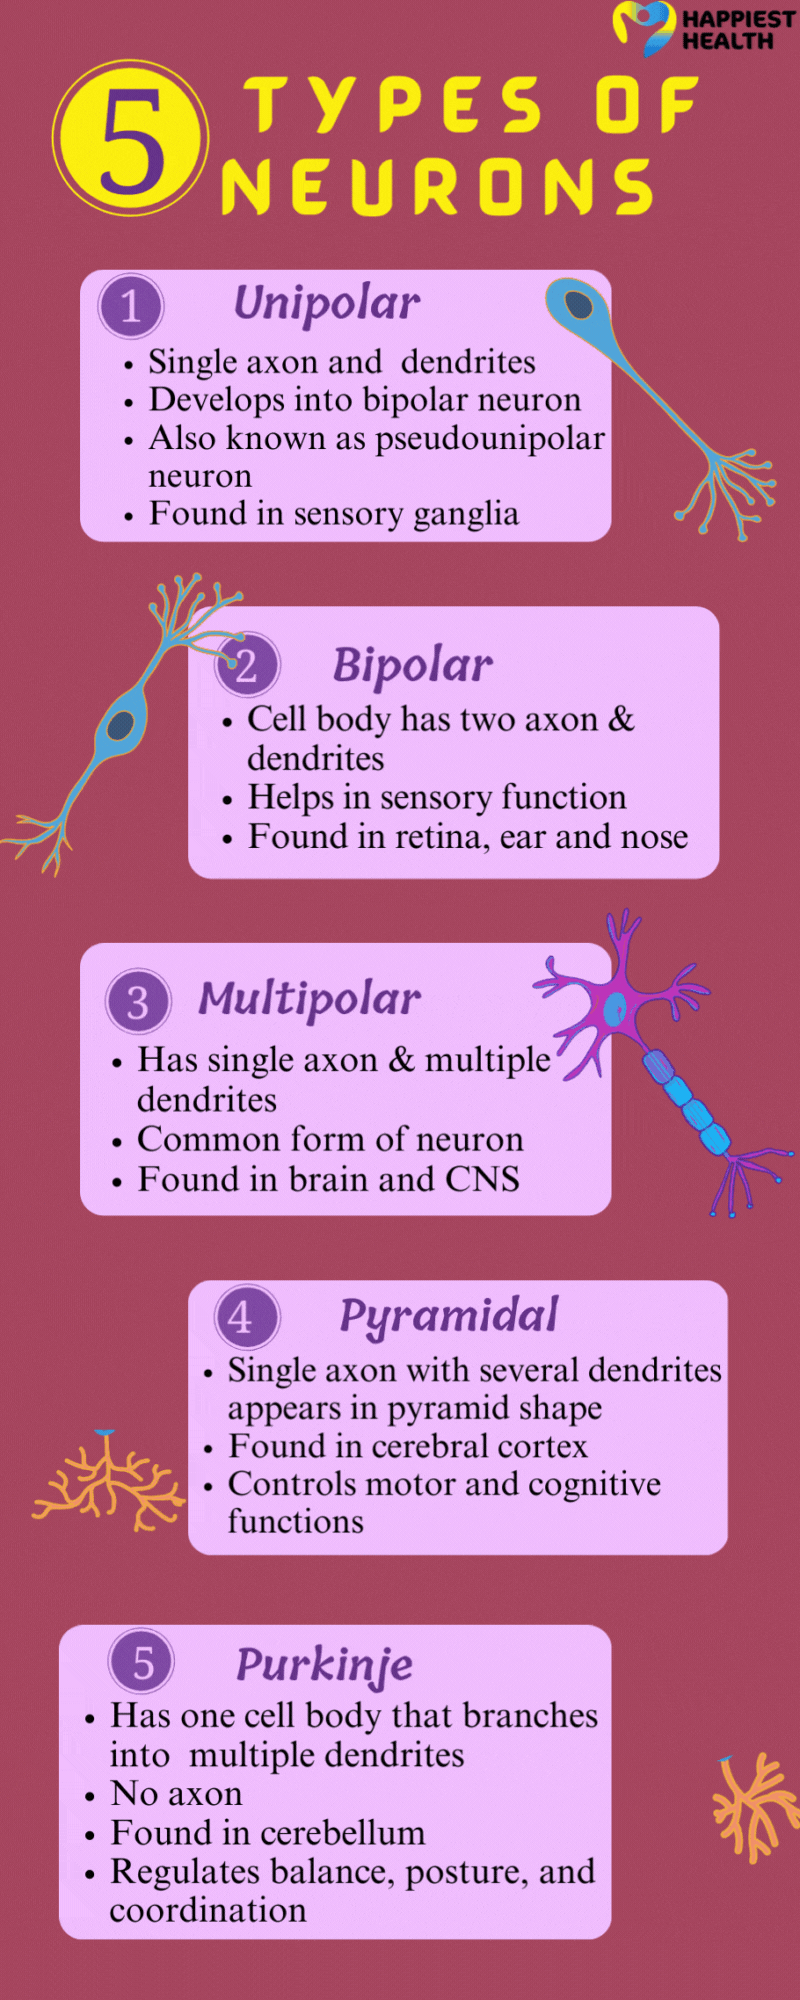 The brain has different types of neurons based on the function of the neurons 